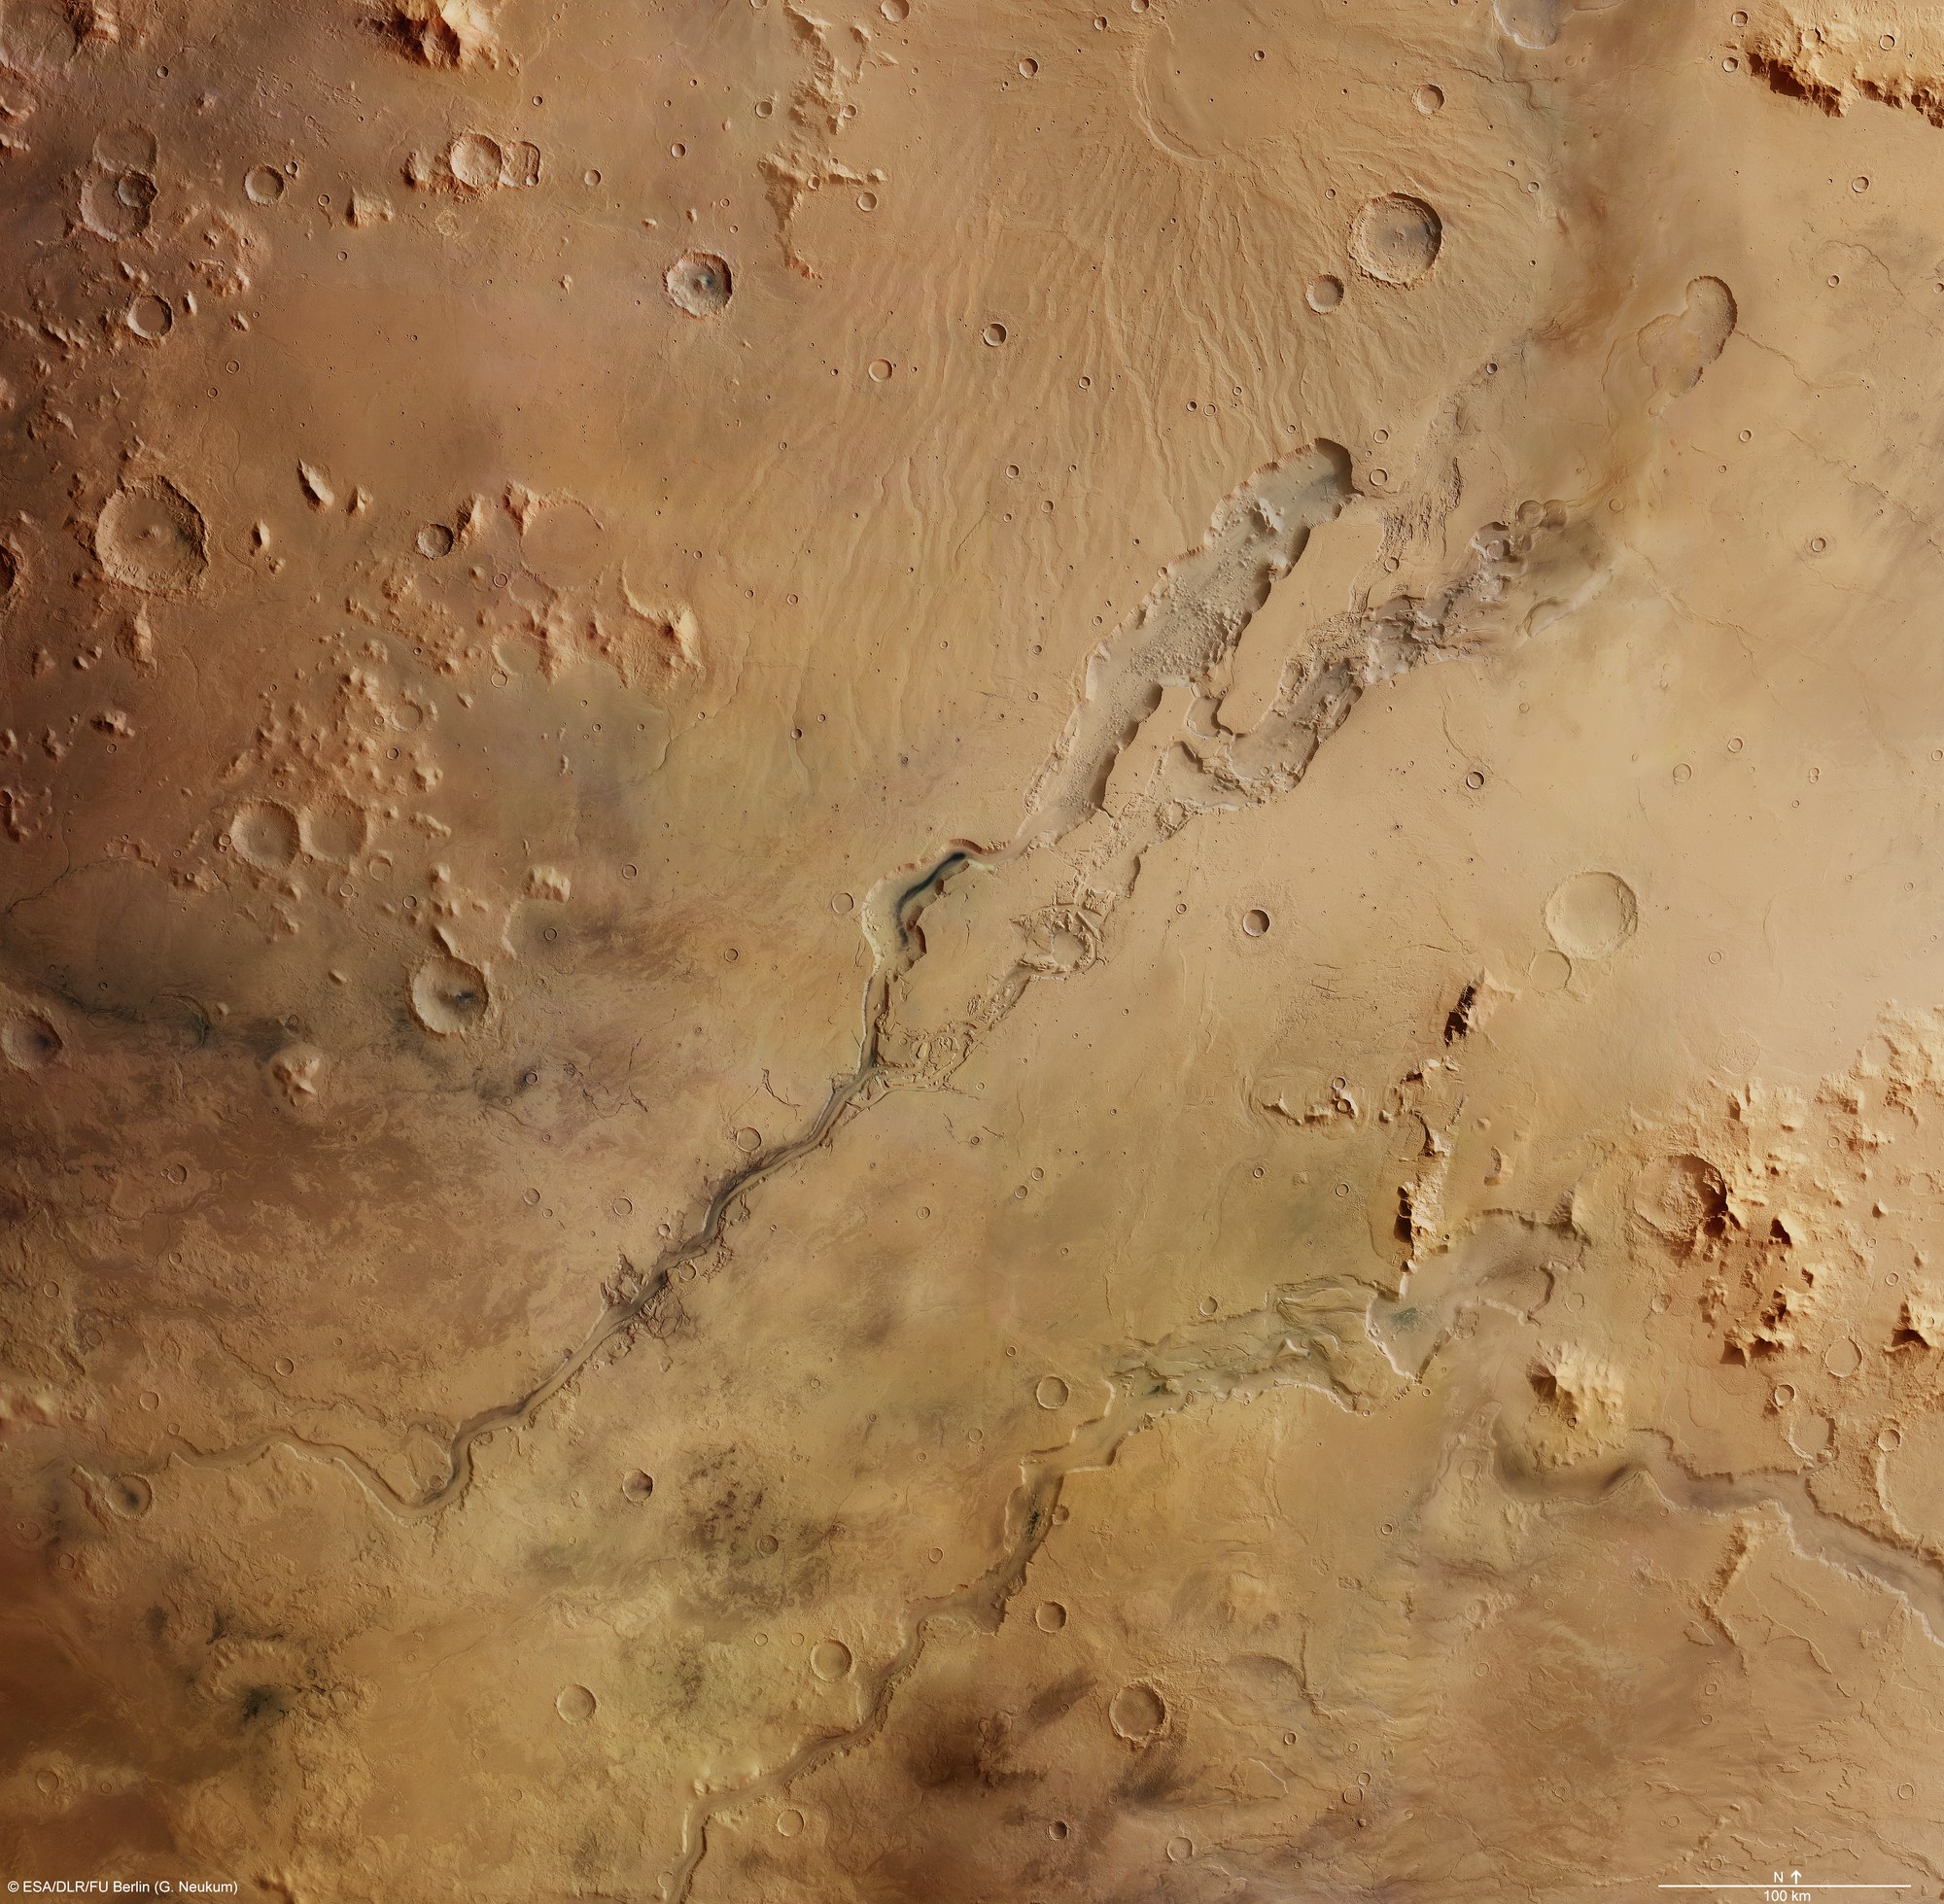 Vertical view of the Dao and Niger Valles